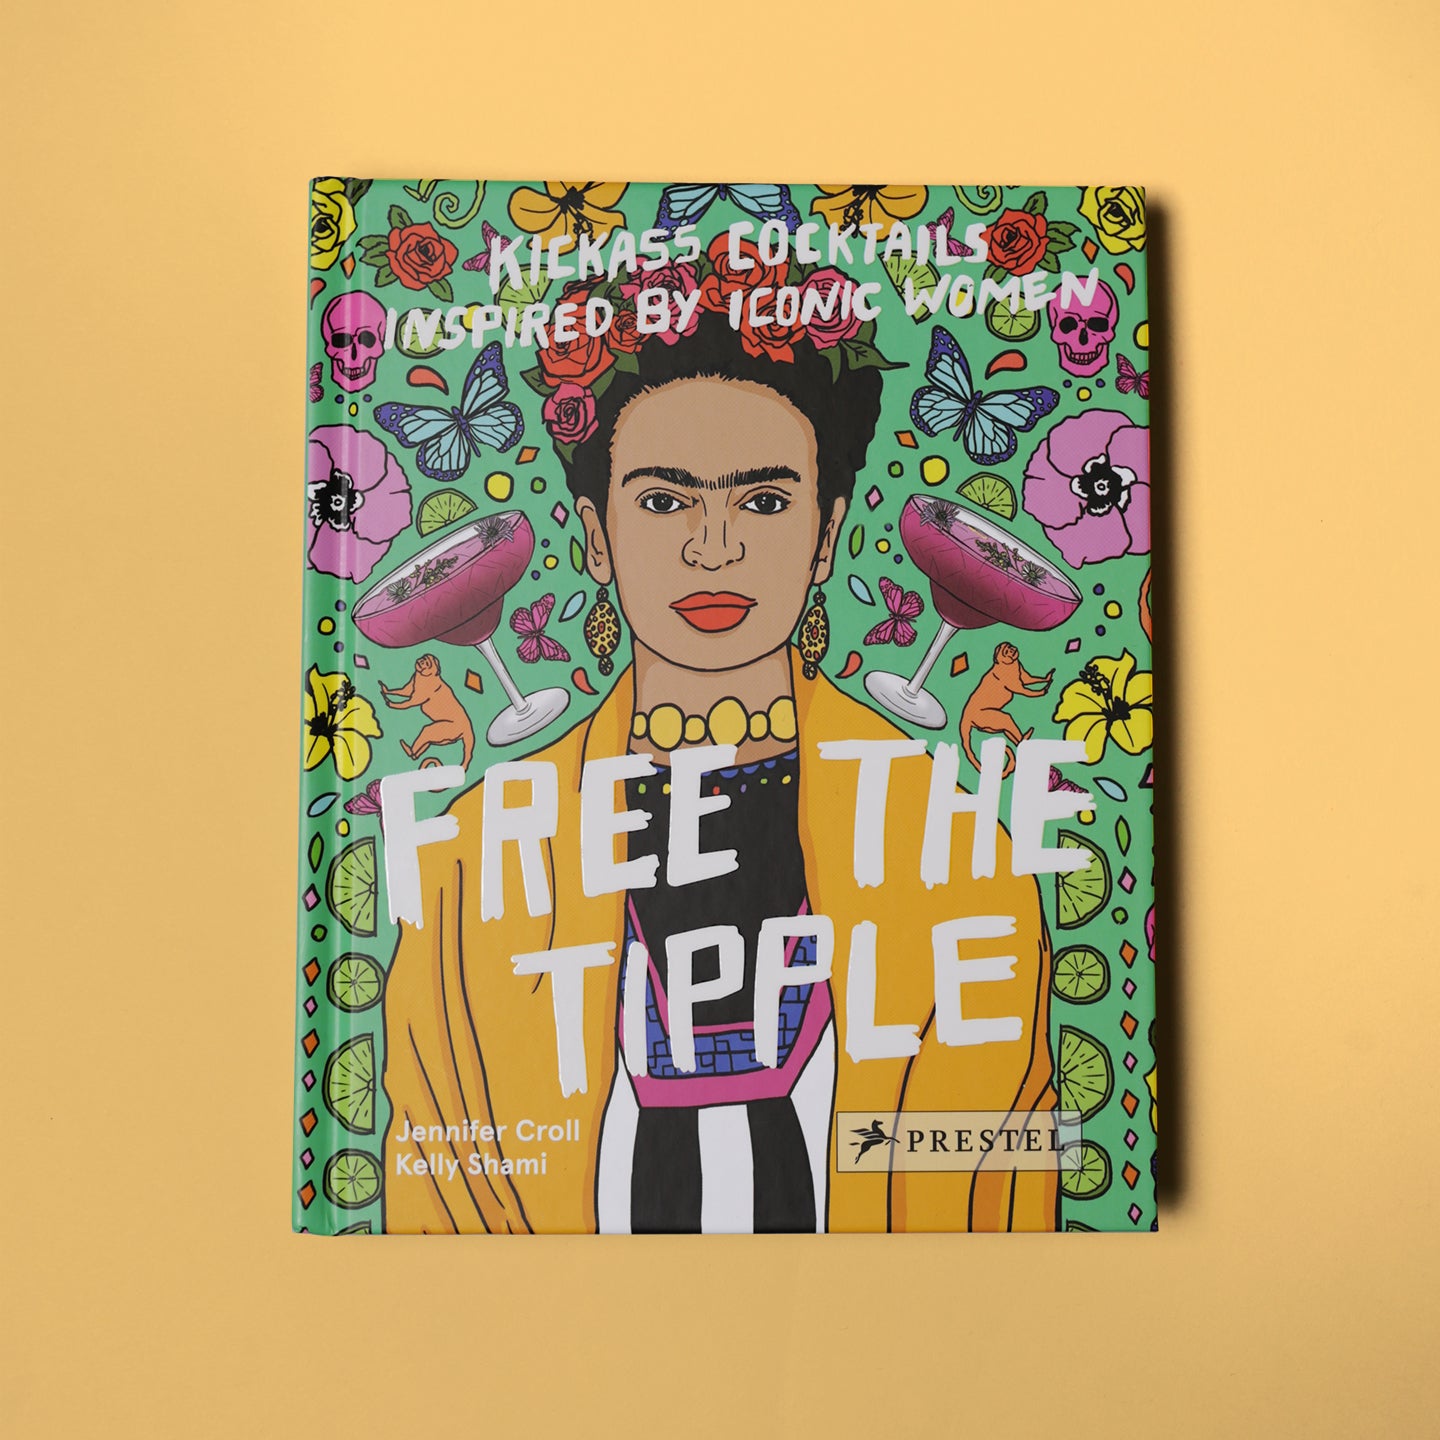 Free The Tipple - Kickass Cocktails Inspired by Iconic Women